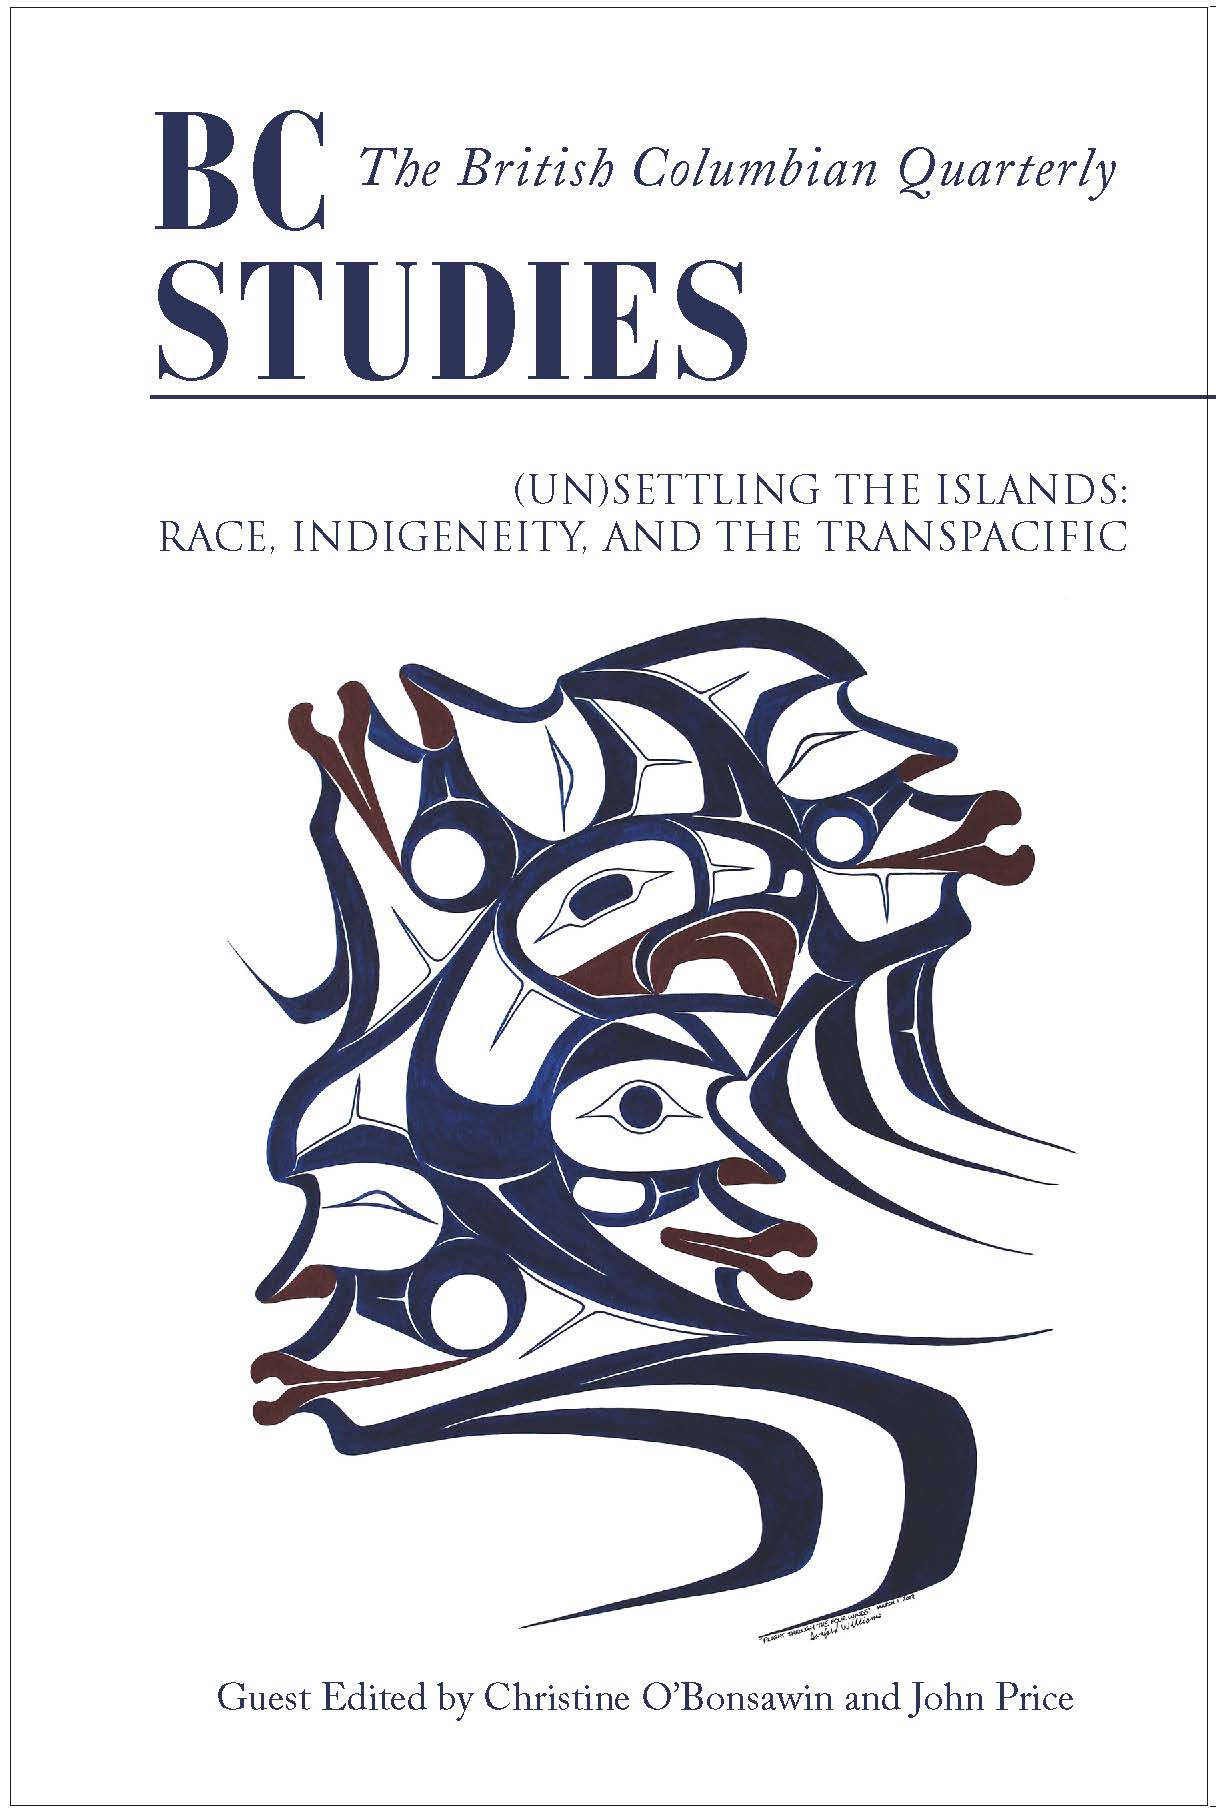 					View No. 204: (Un)Settling the Islands: Race, Indigeneity, and the Transpacific
				